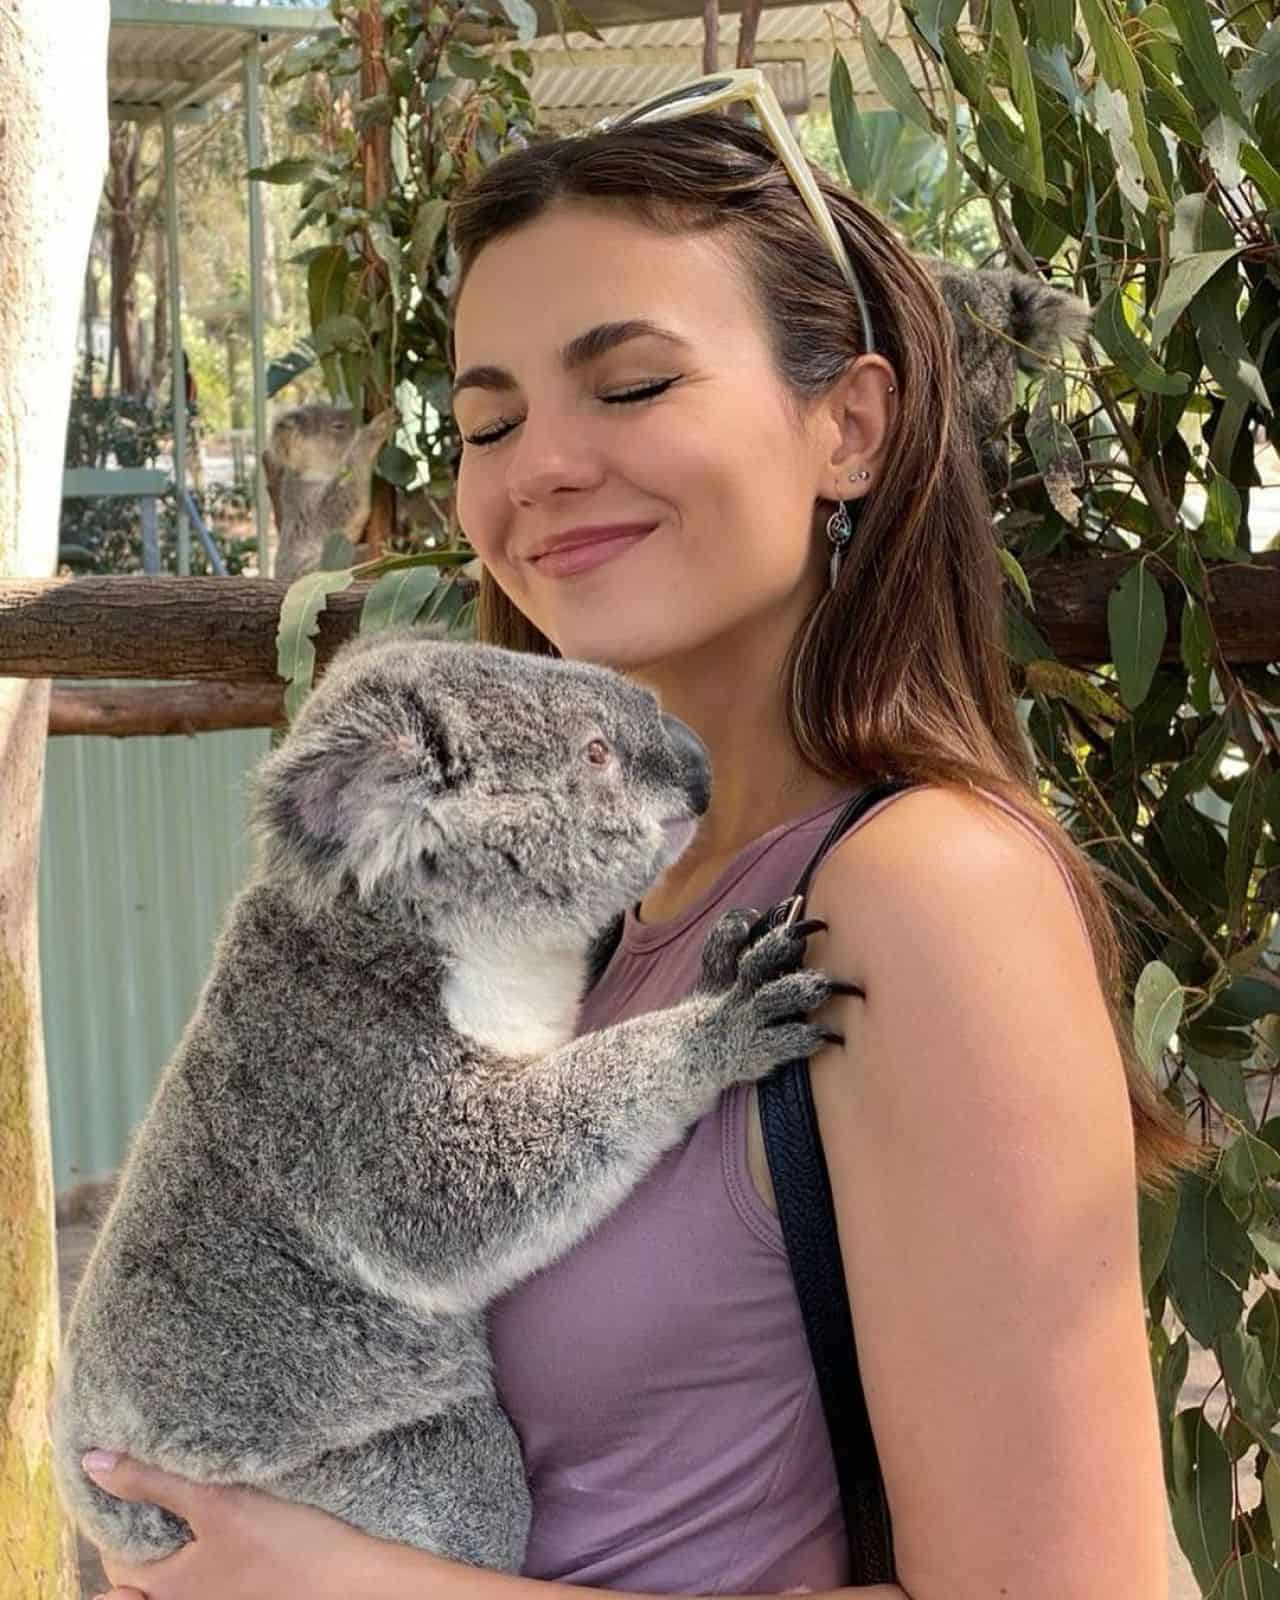 Victoria Justice Shared Pictures of her Holding a Koala on Instagram